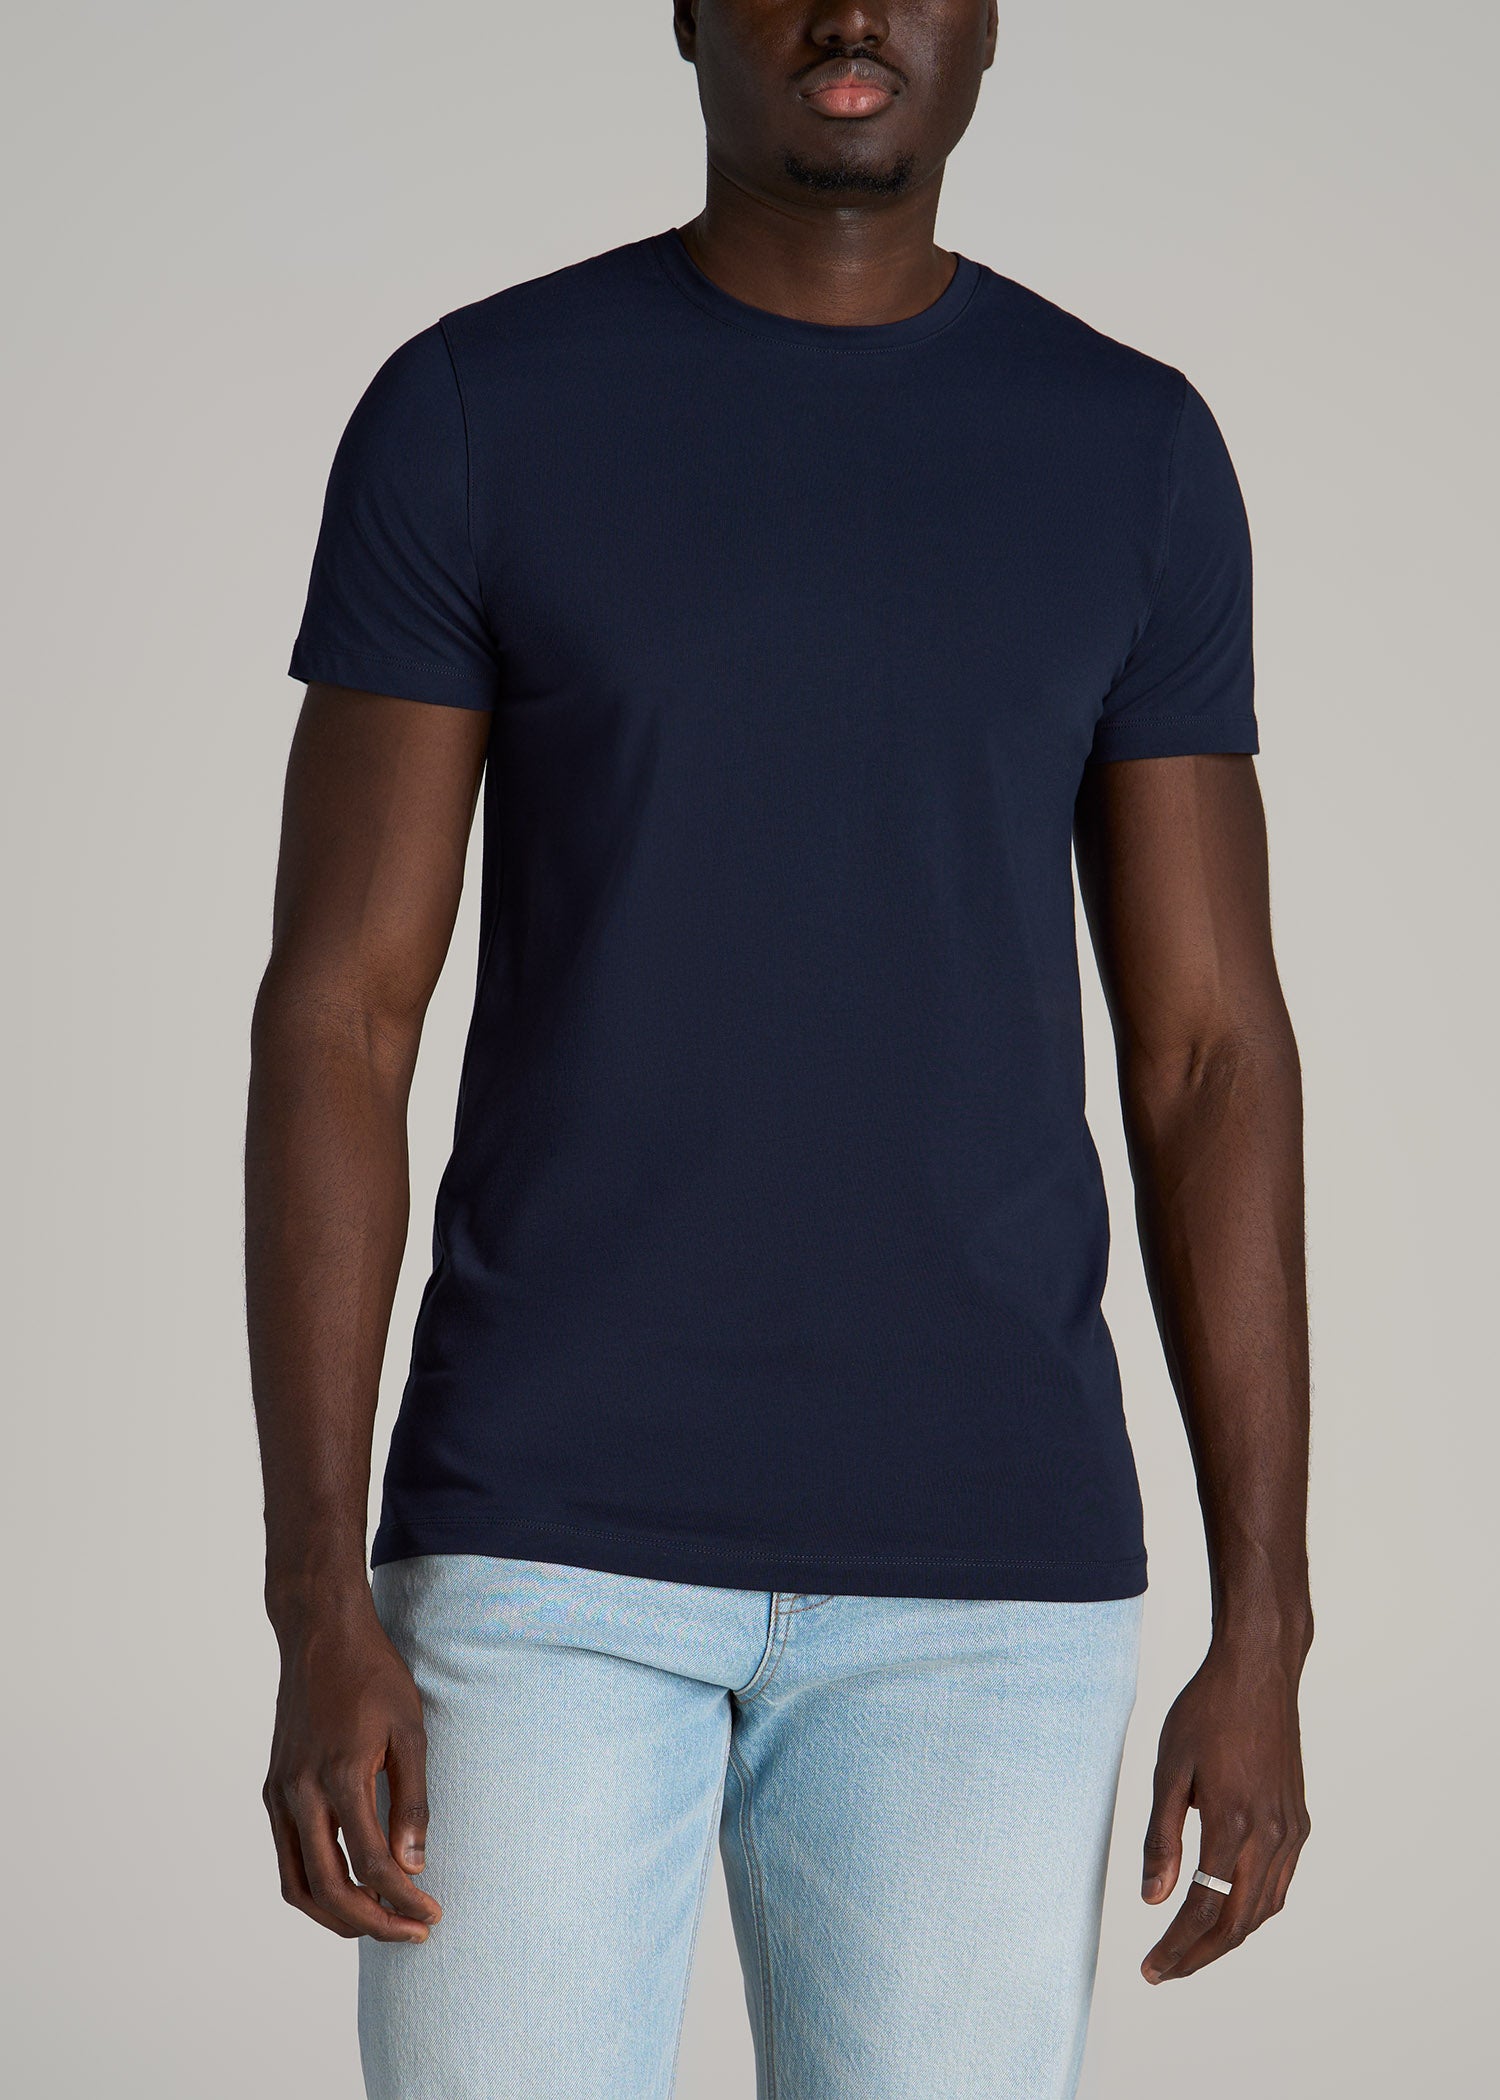 Stretch Cotton T-Shirt for Tall Men